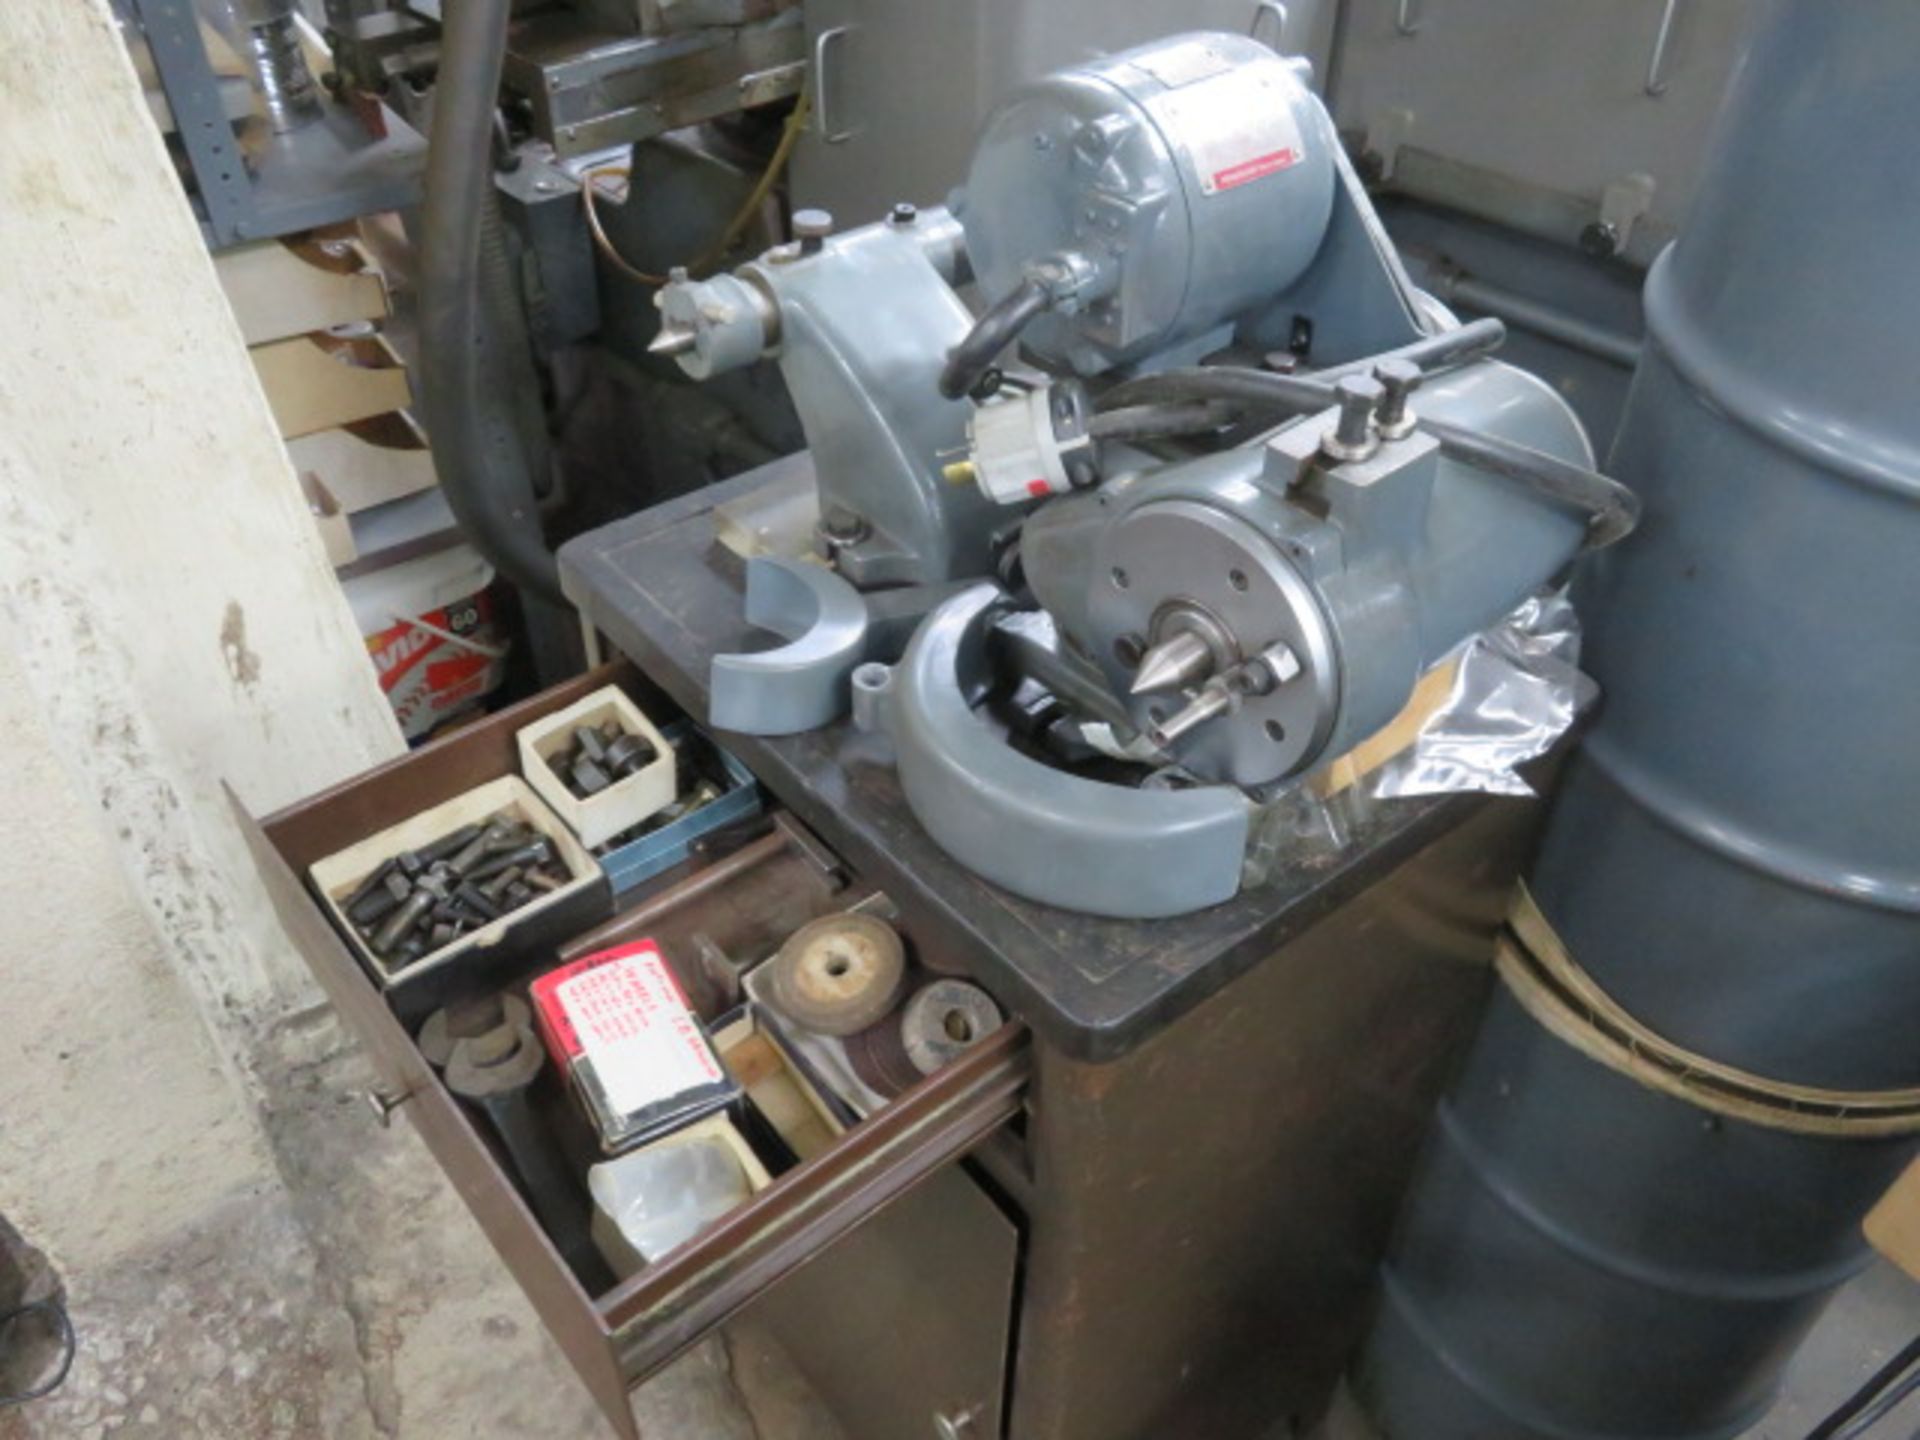 CINCINNATI NO. 2 TOOL & CUTTER GRINDER, S/N 1D2T5A-183, SURFACE ...PLUS $100 RIGGING & LOADING FEE - Image 5 of 6